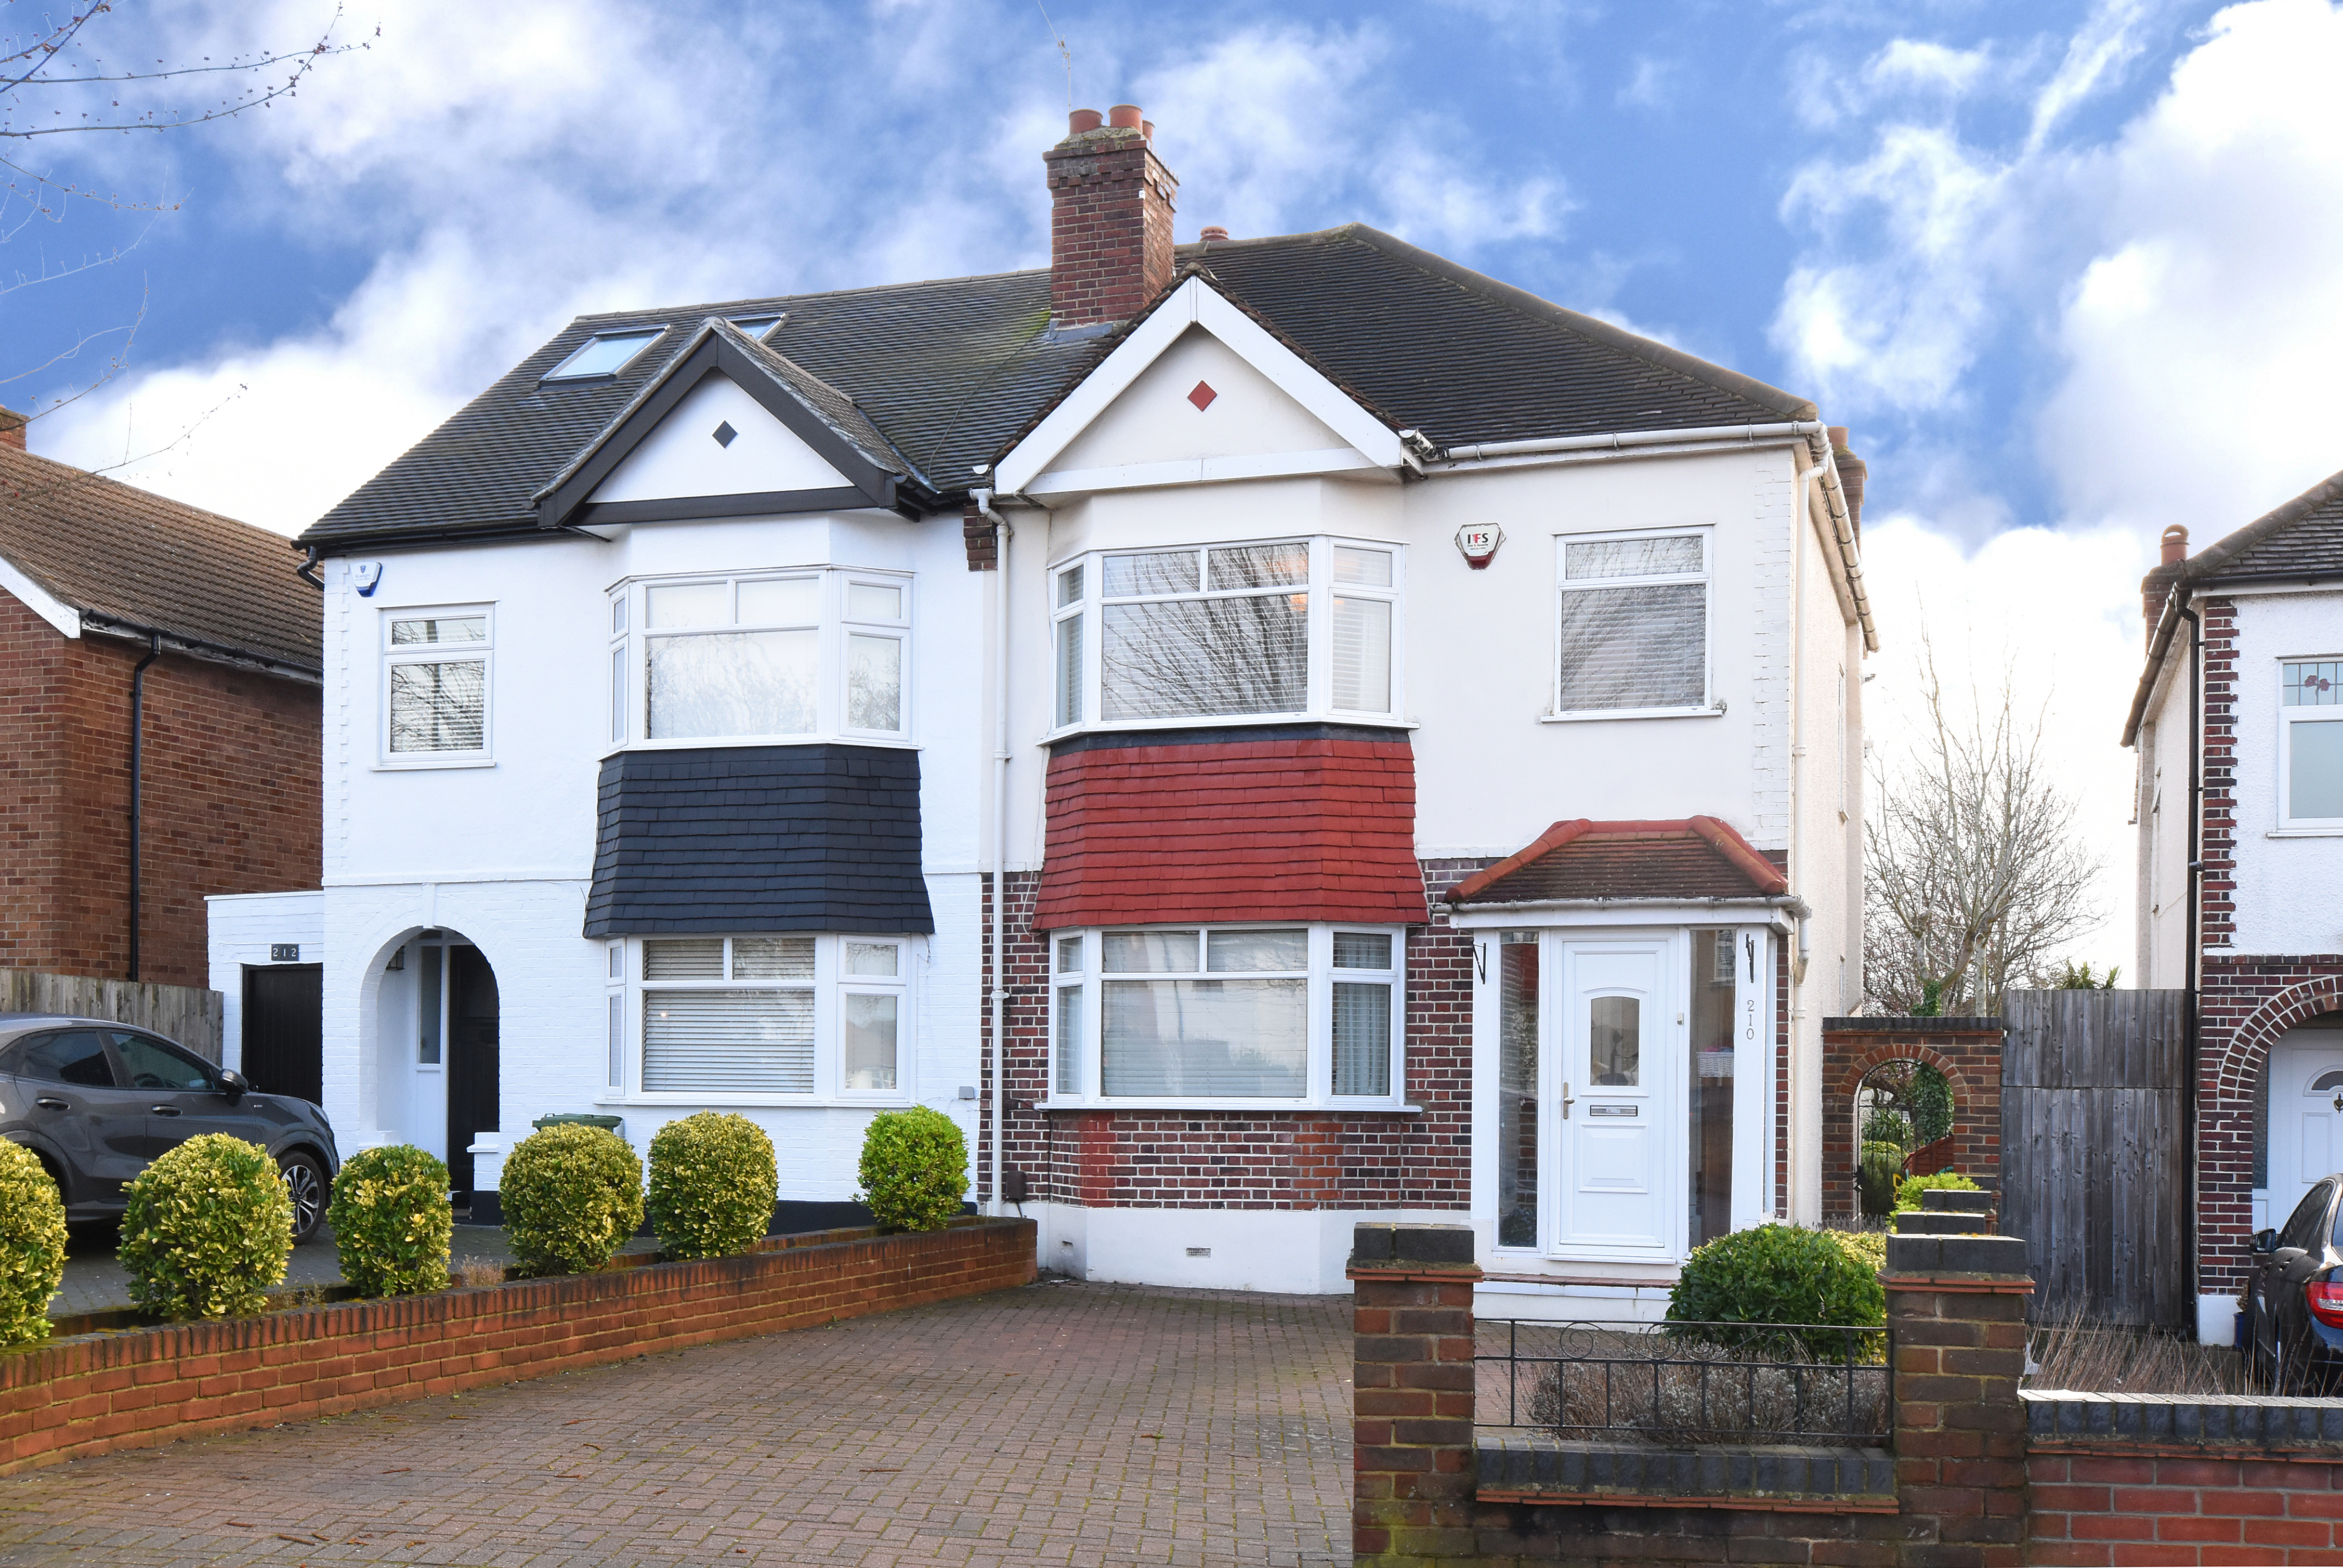 3 bed semi-detached house for sale in Burnt Ash Lane, Bromley - Property Image 1